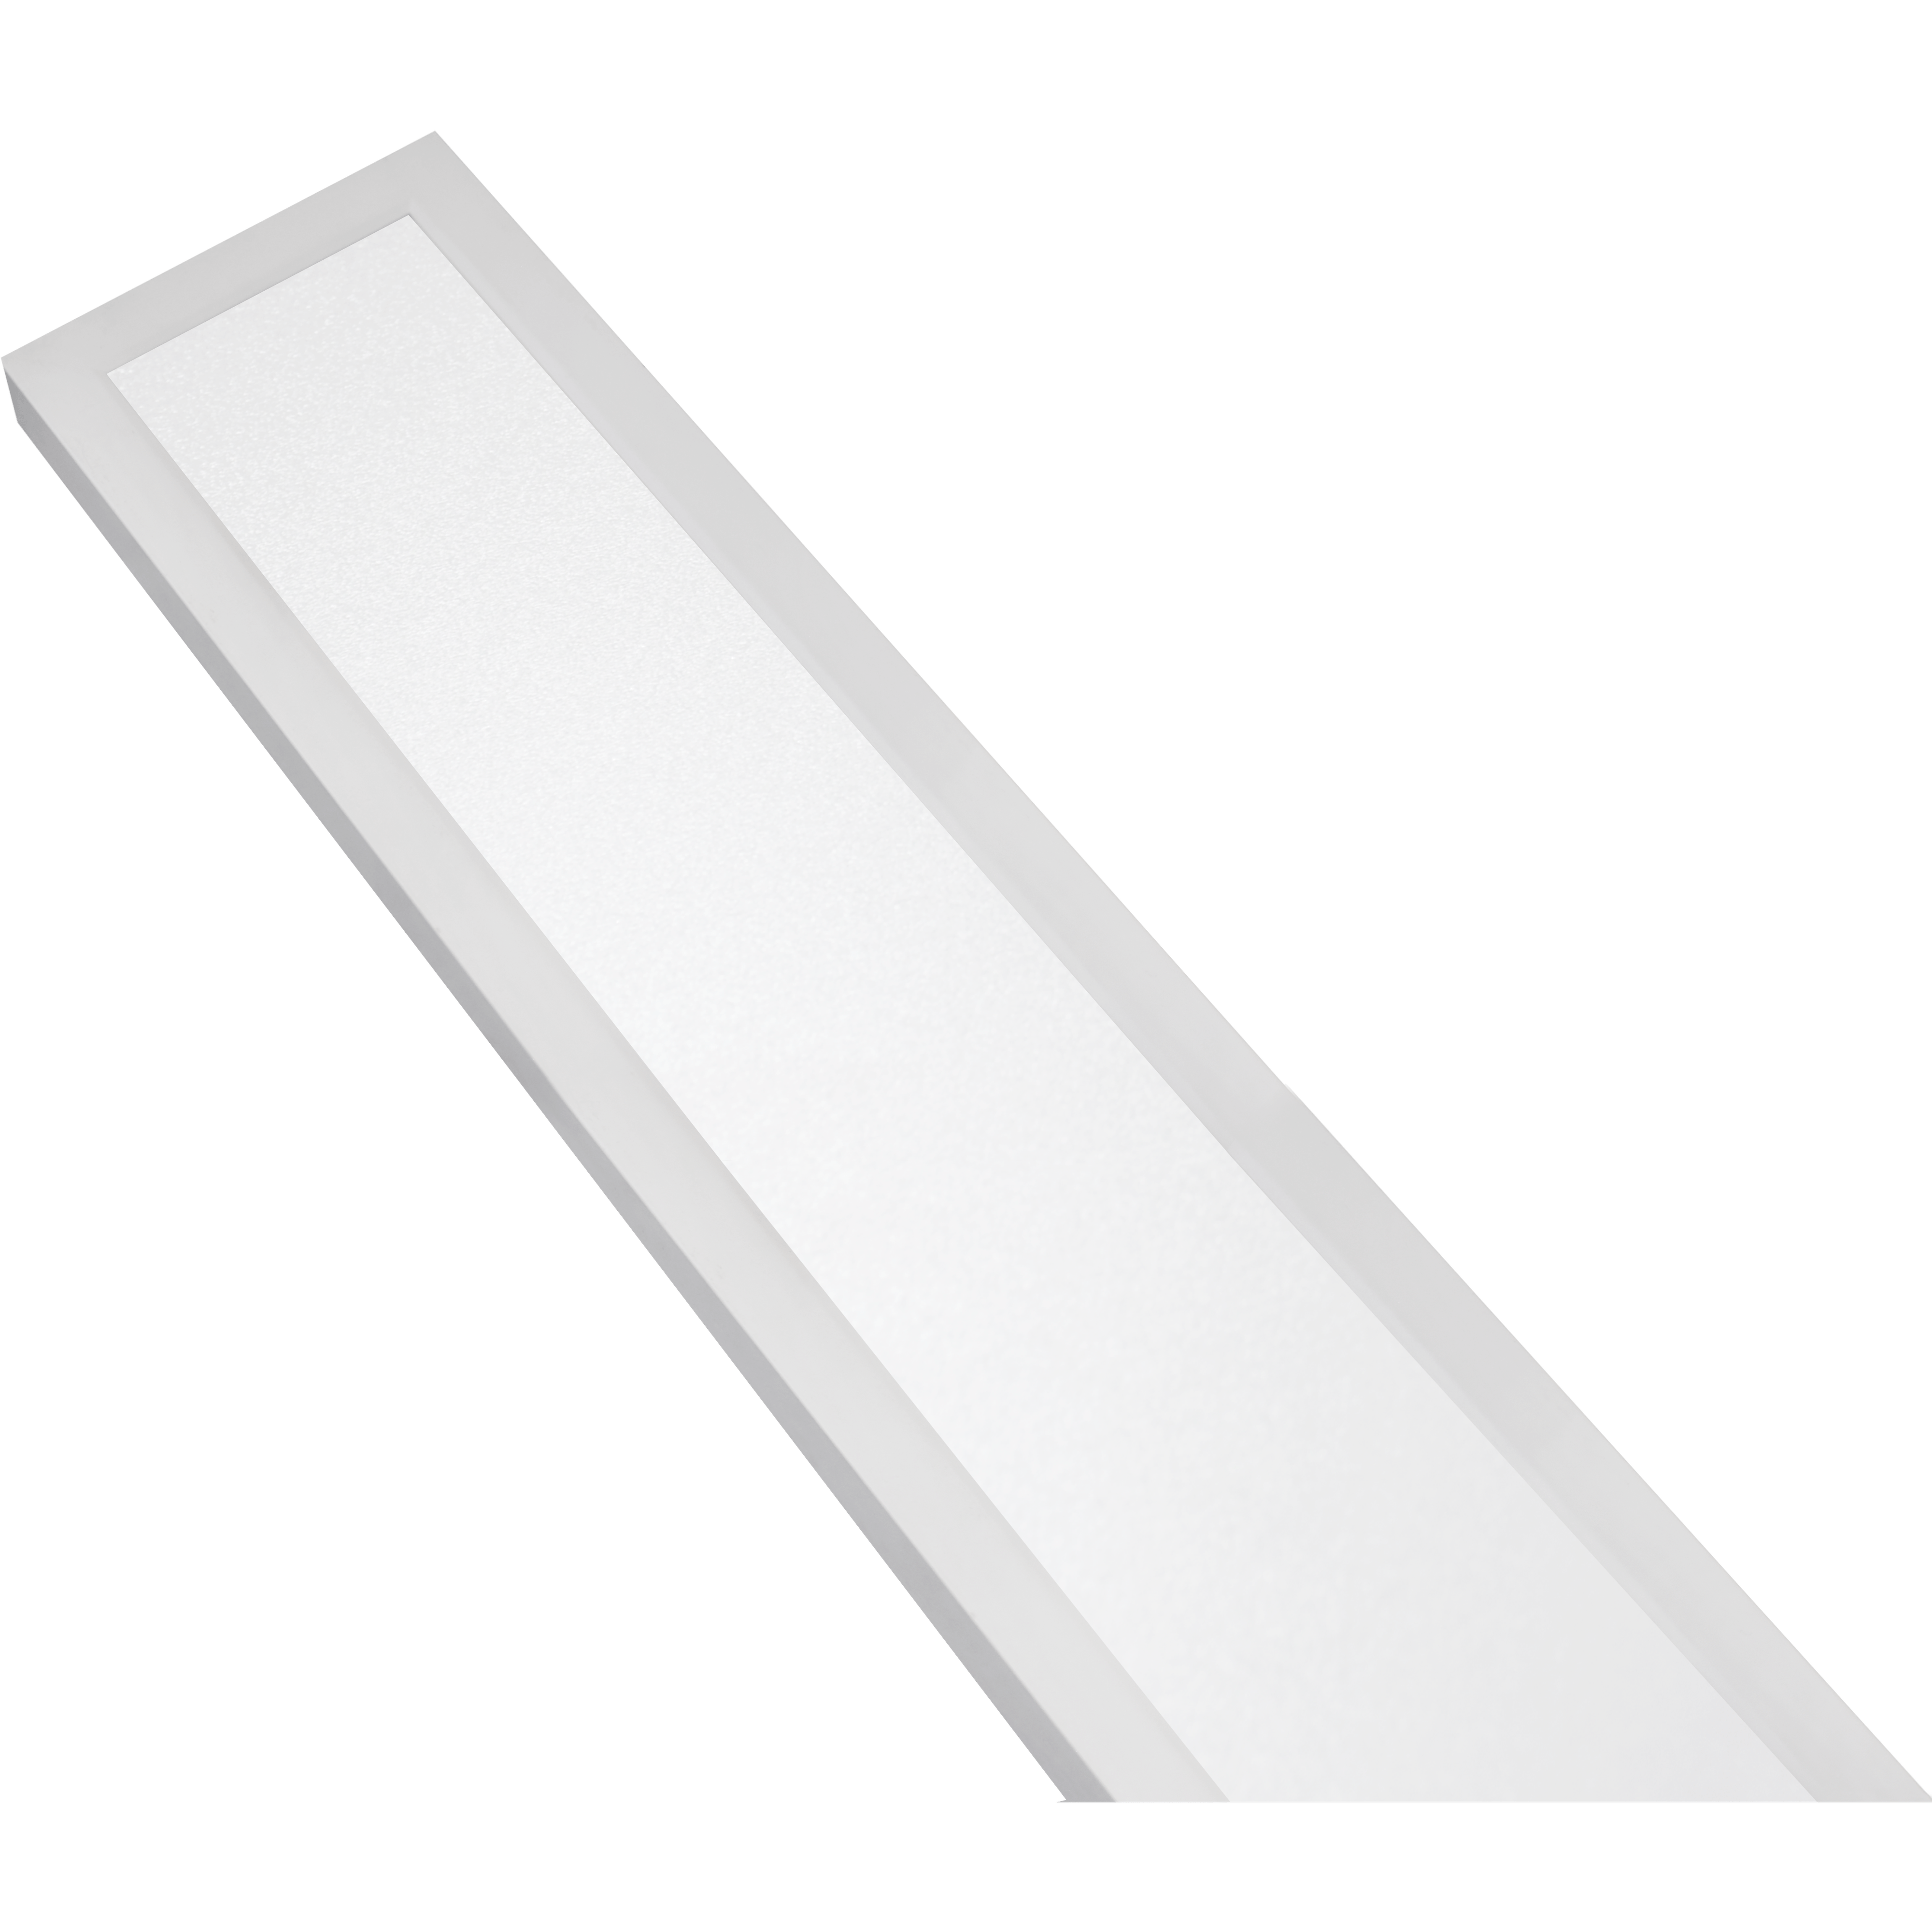 POE Texas Lighting Denton Linear Recessed PoE Lights - 6 in x 4 ft (Surface)